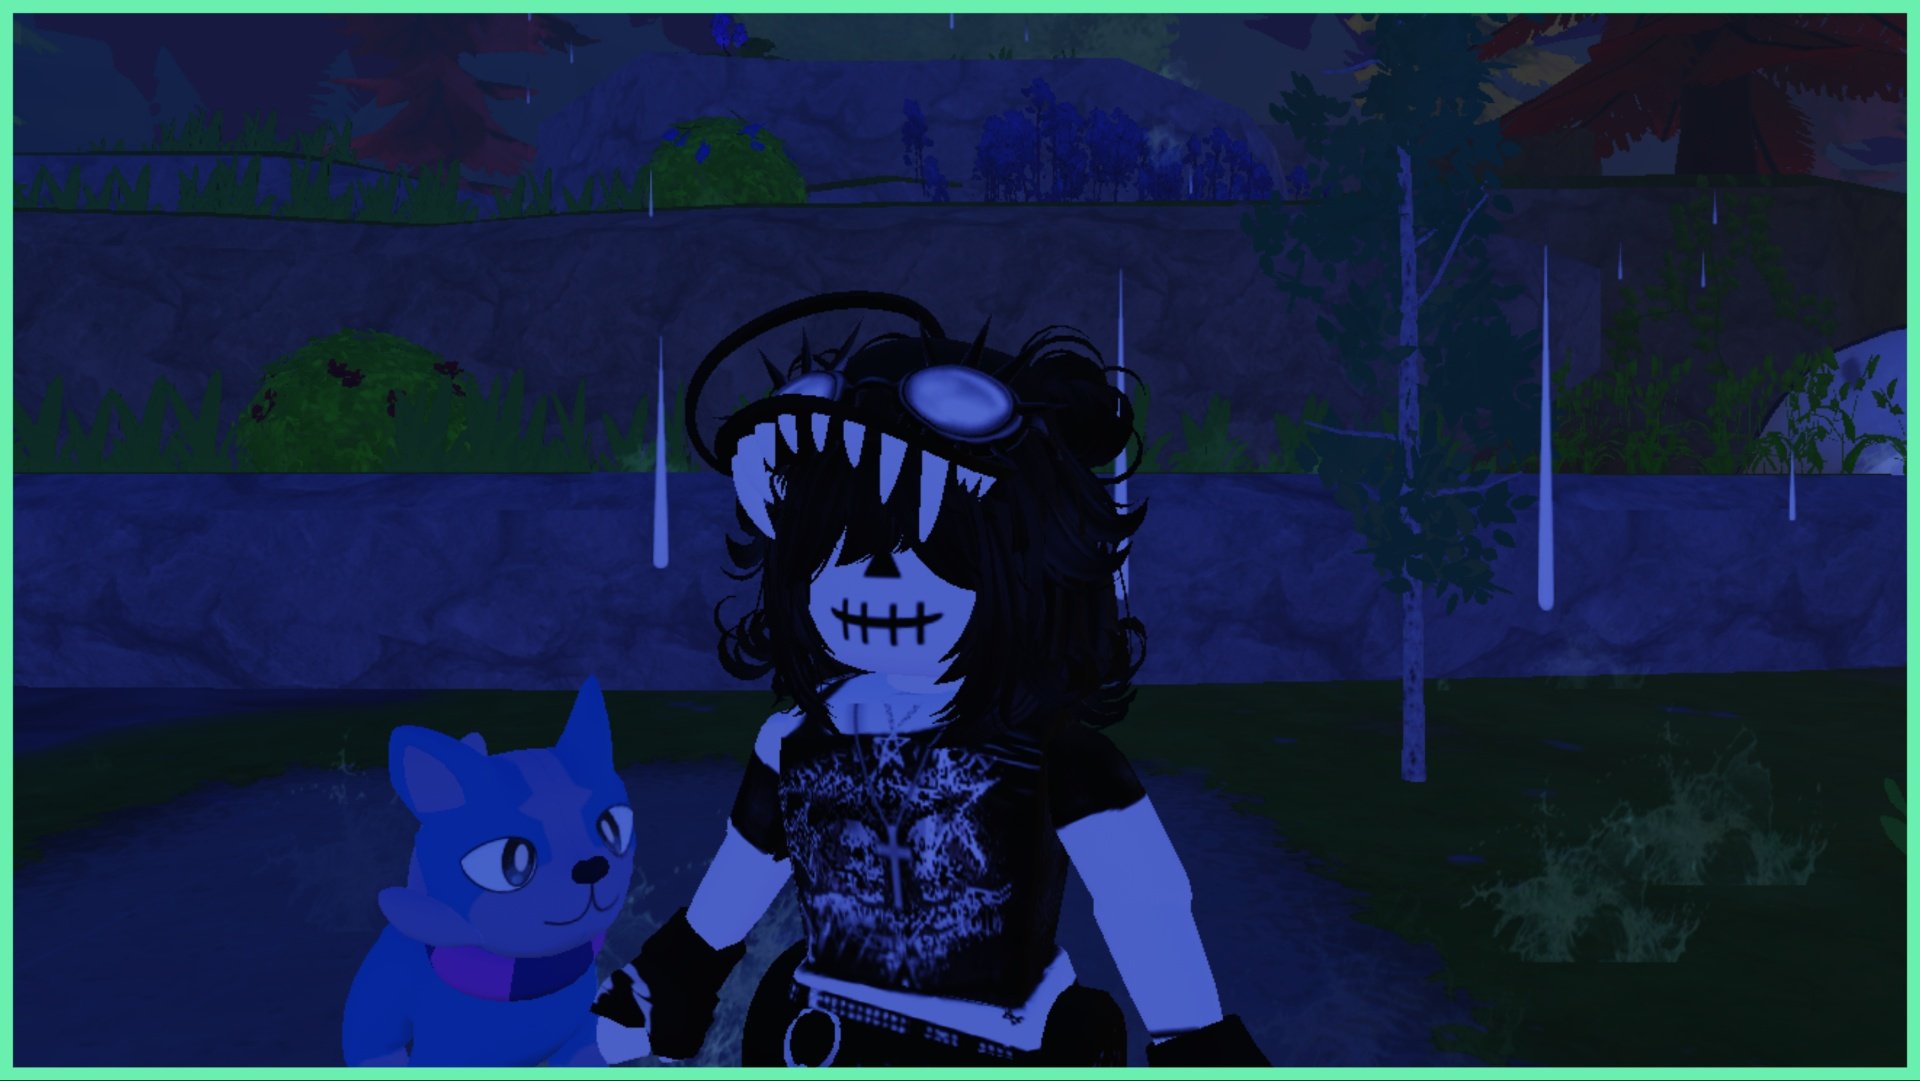 feature image for our event drippo guide which shows my avatar and her chewaqua during rainy weather at nighttime. Behind them are a row of trees and rocks